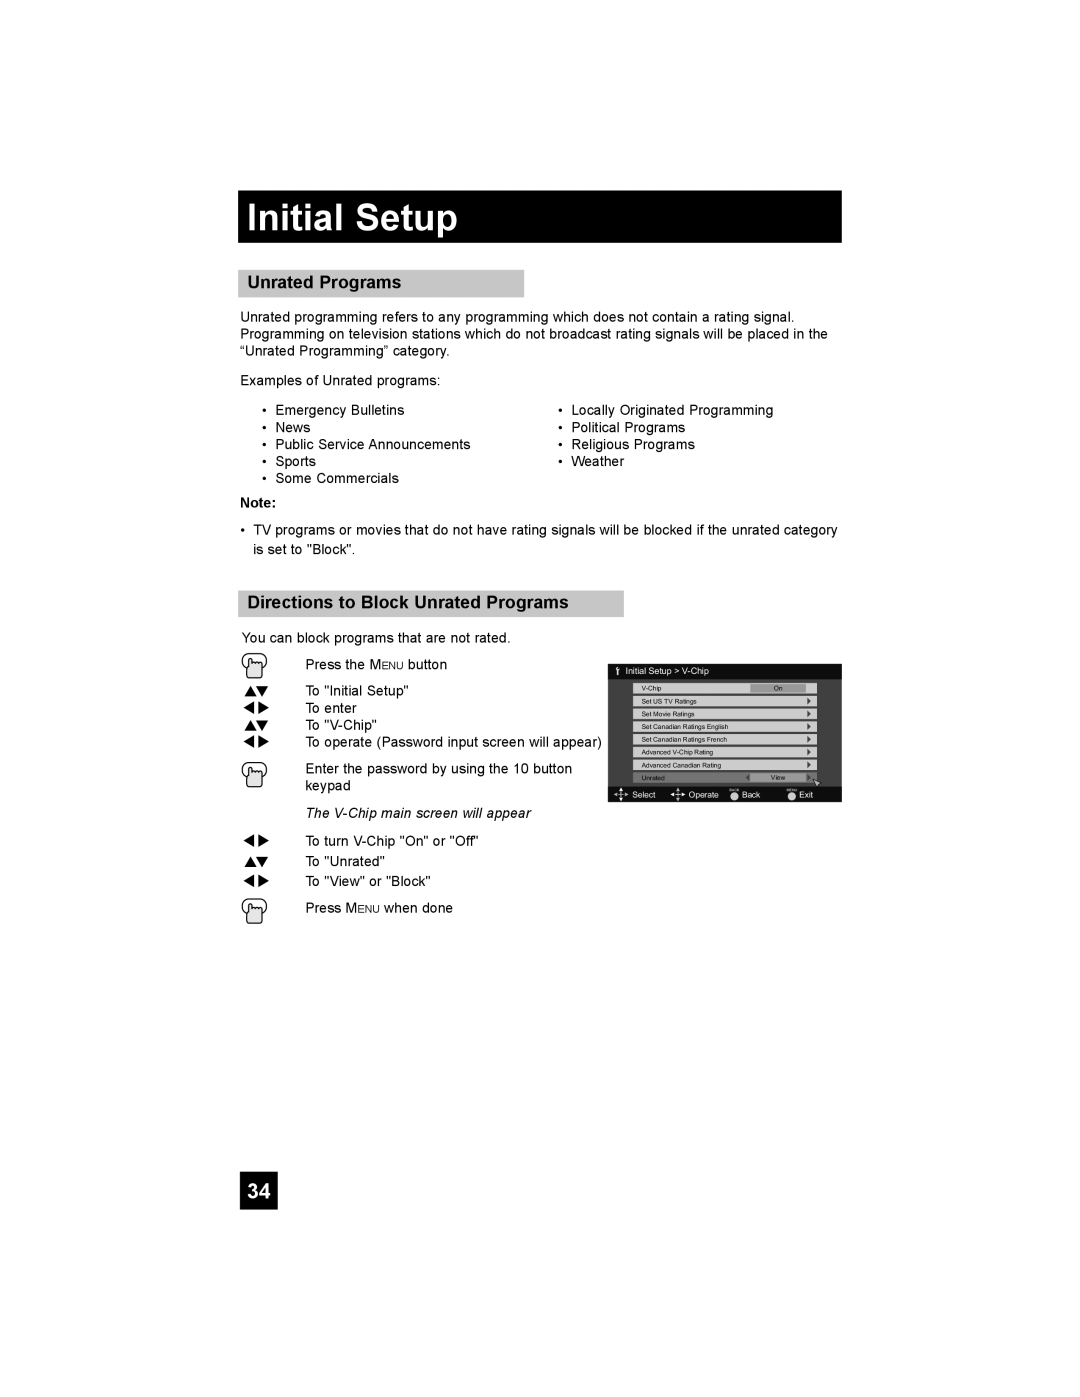 JVC LT-37EX38, LT-42EX38 manual Directions to Block Unrated Programs, Initial Setup, The V-Chip main screen will appear 